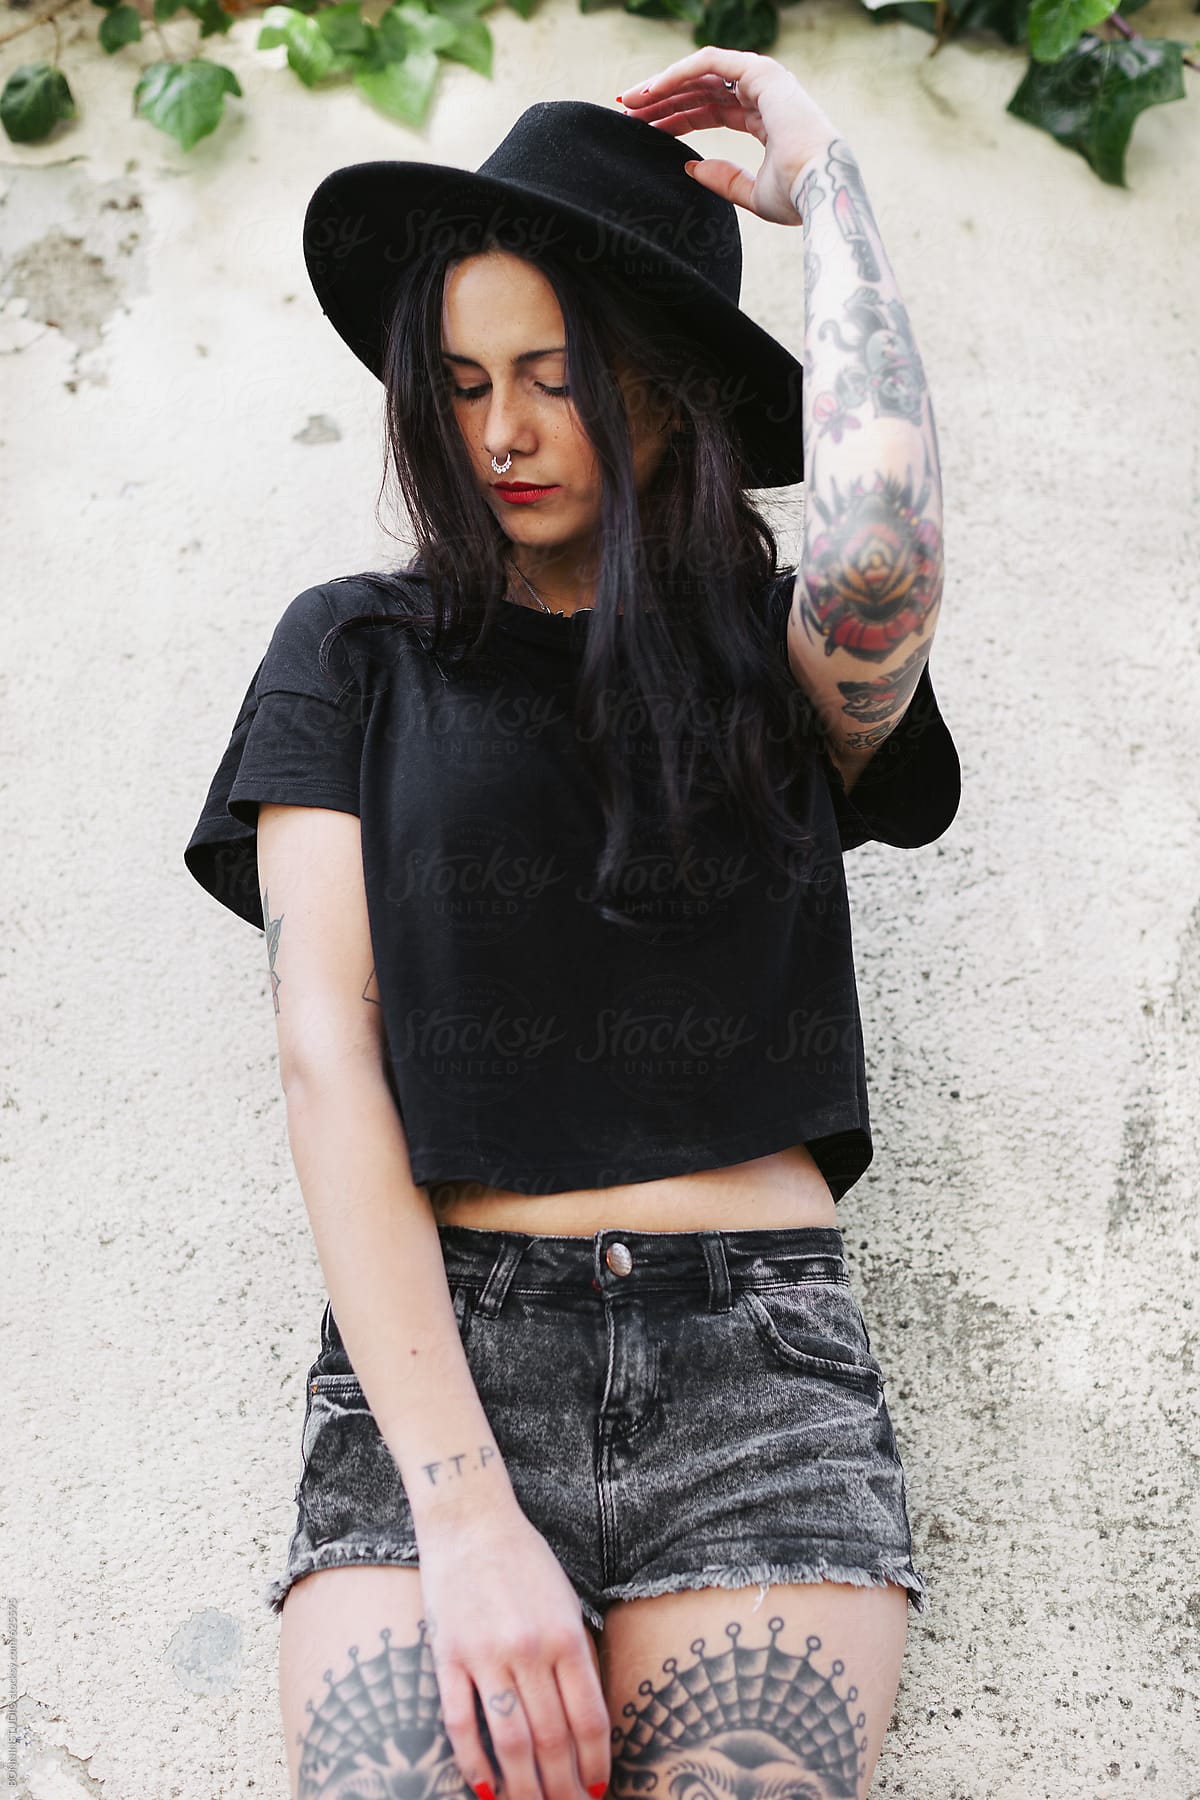 Young alternative woman with tattoos posing in front a wall.